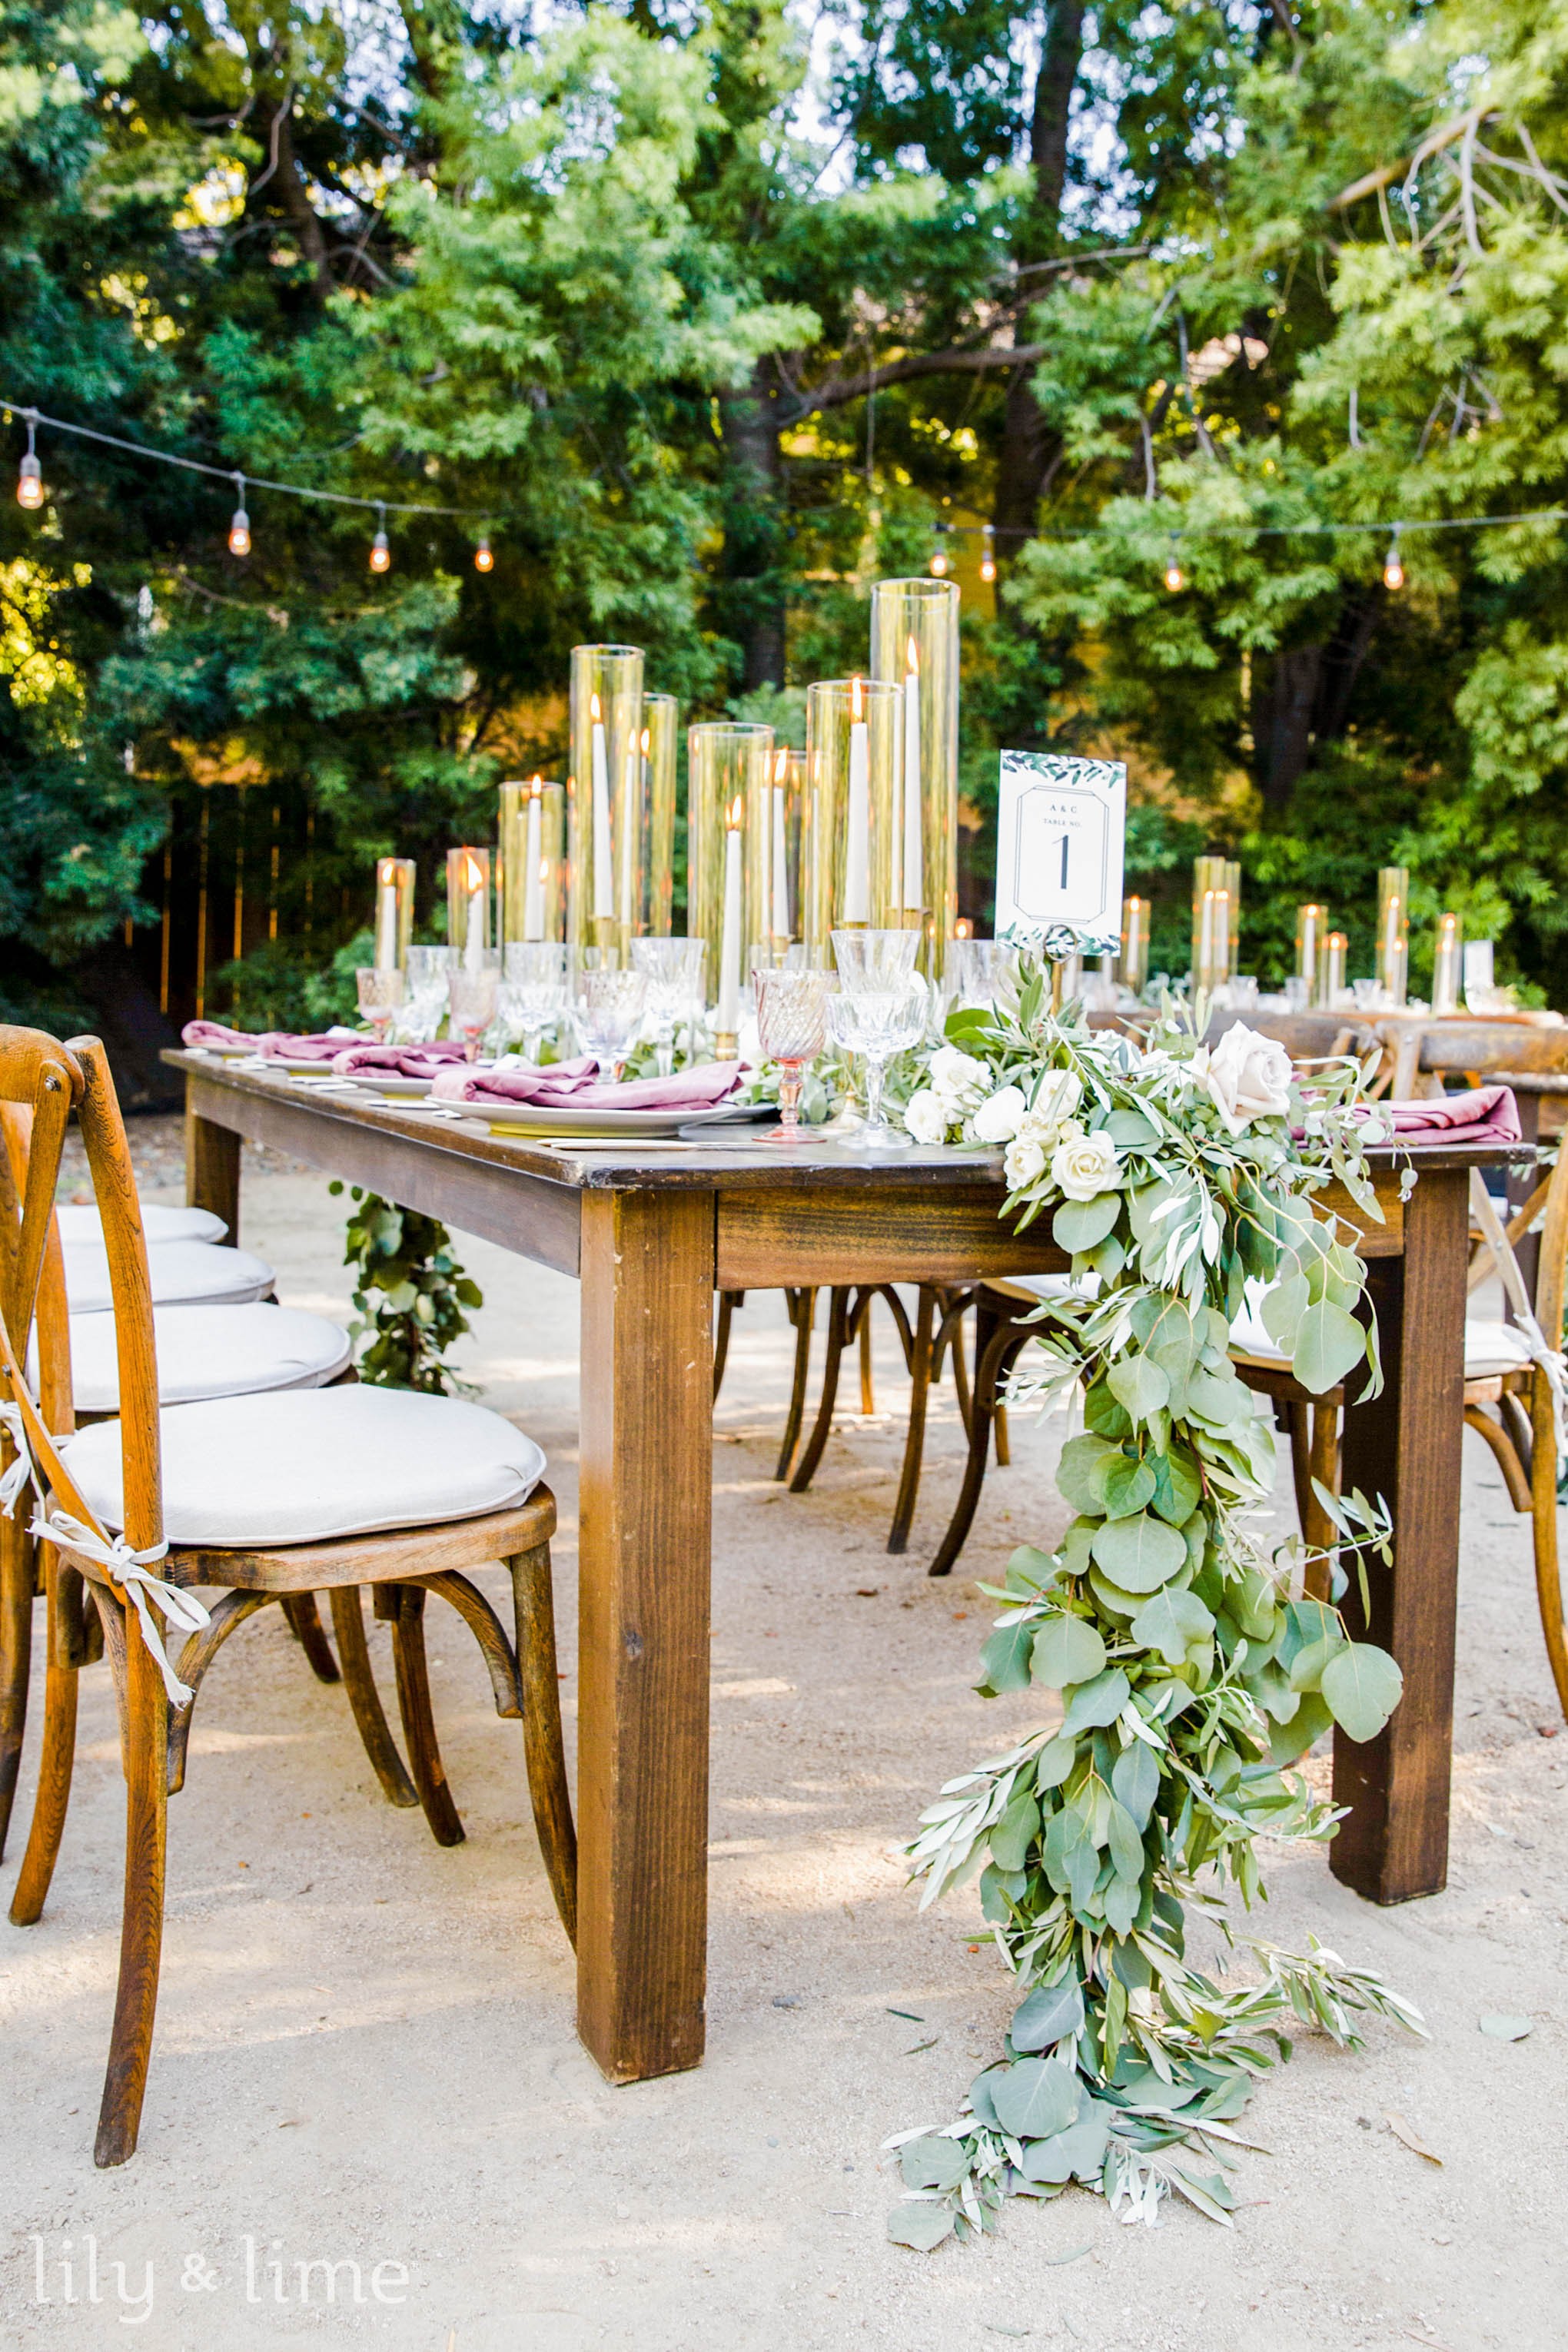 Elegant Spring Wedding Venues For Making The Day Unforgettable